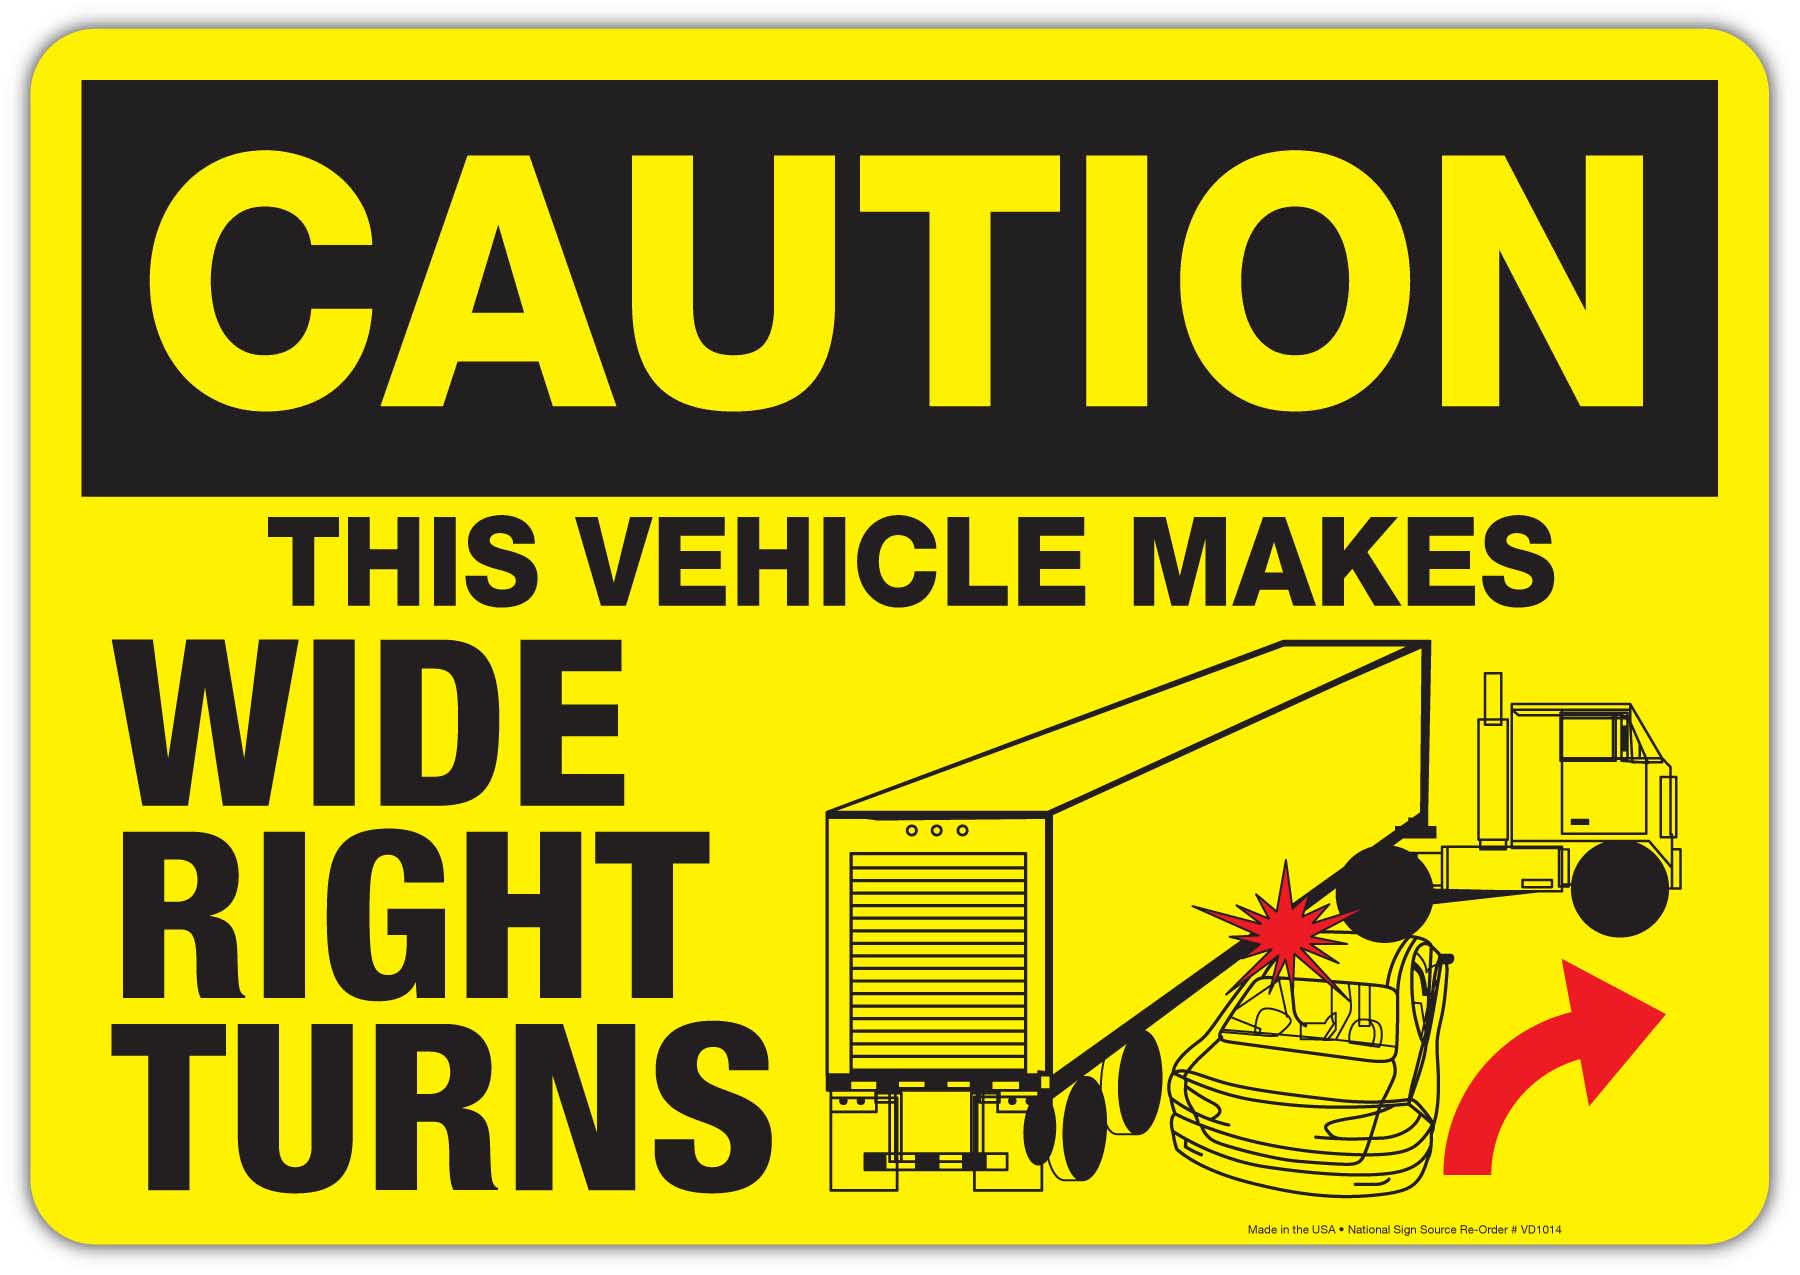 Caution this vehicle makes wide right turns sticker sign.  Sign has image of tractor trailer crashing with car.  Transportation safety sticker signs.